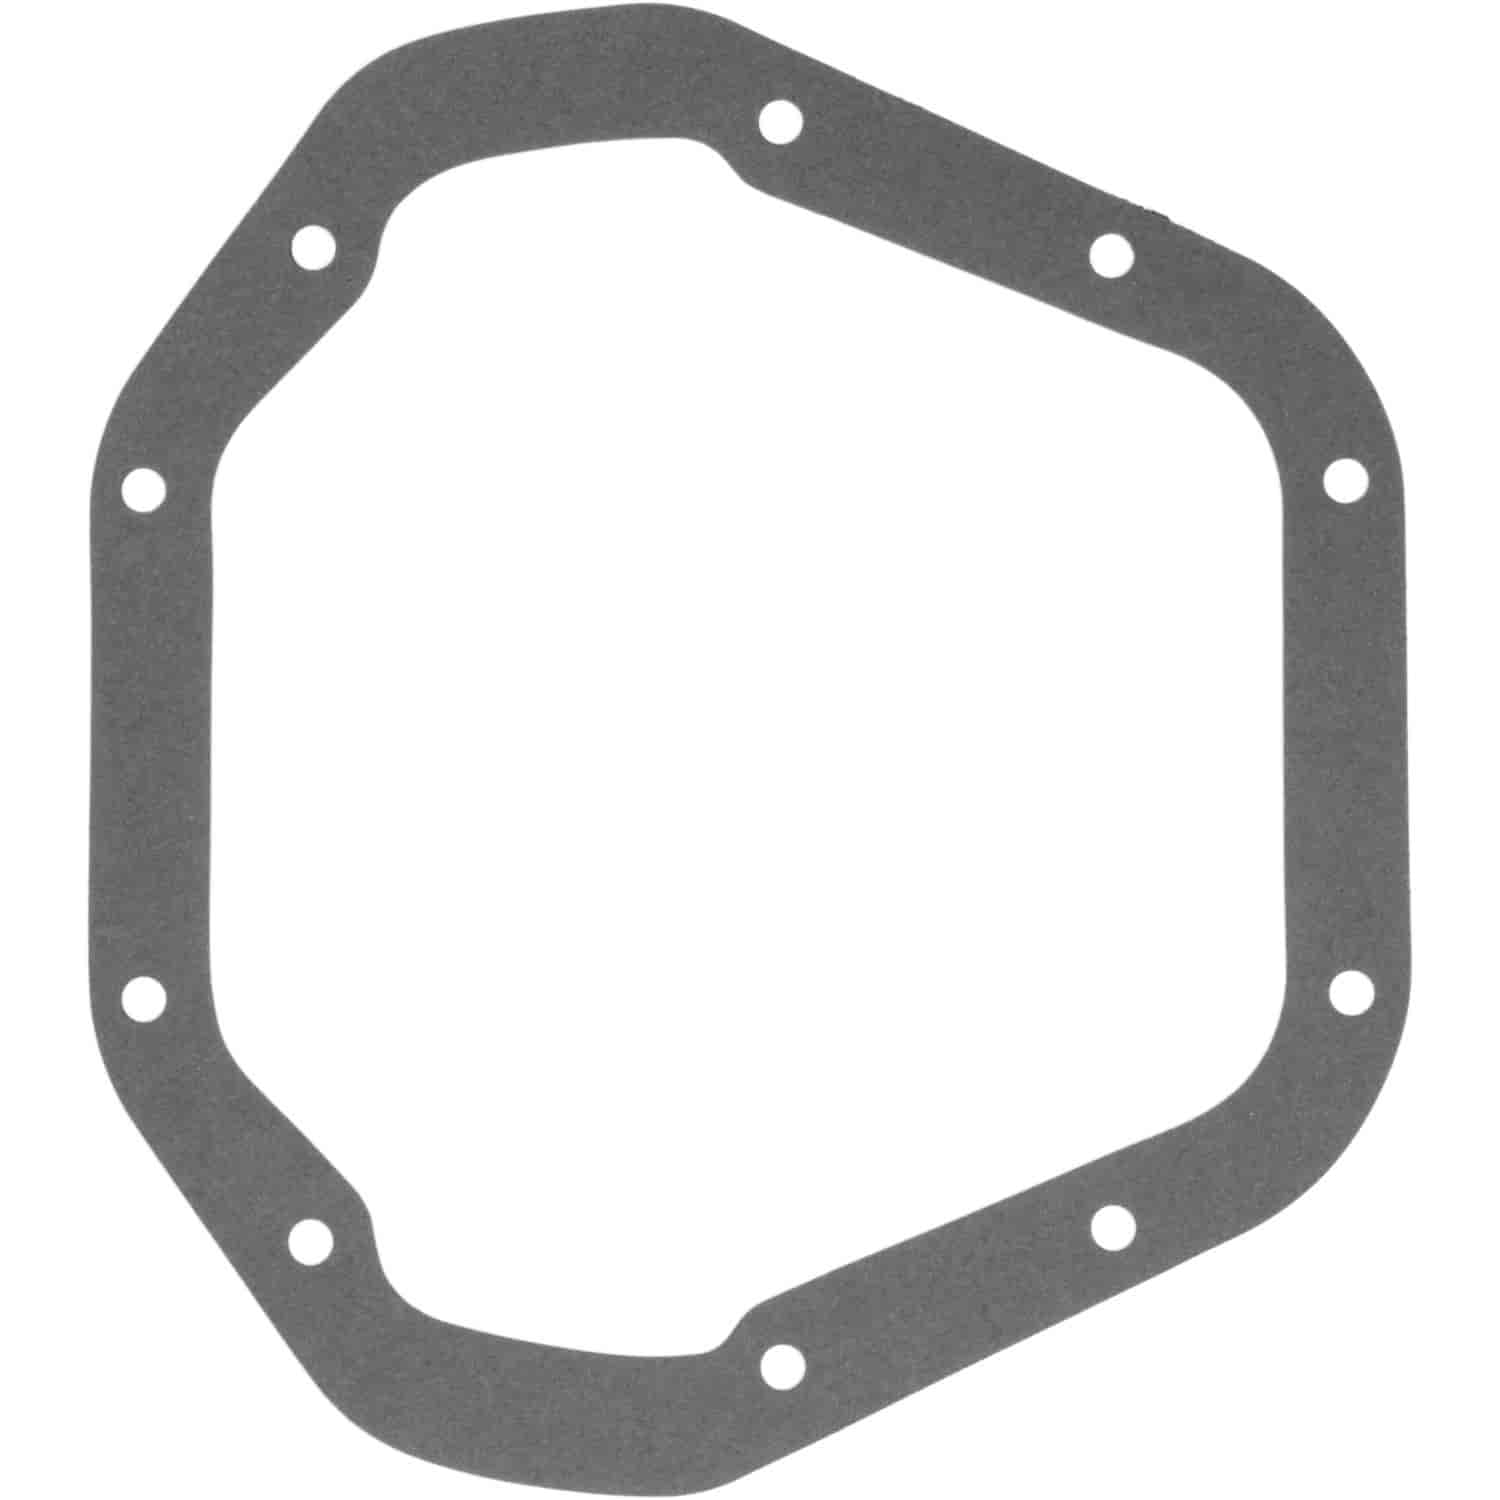 Differential Cover Gasket 10-Bolt Dana 60